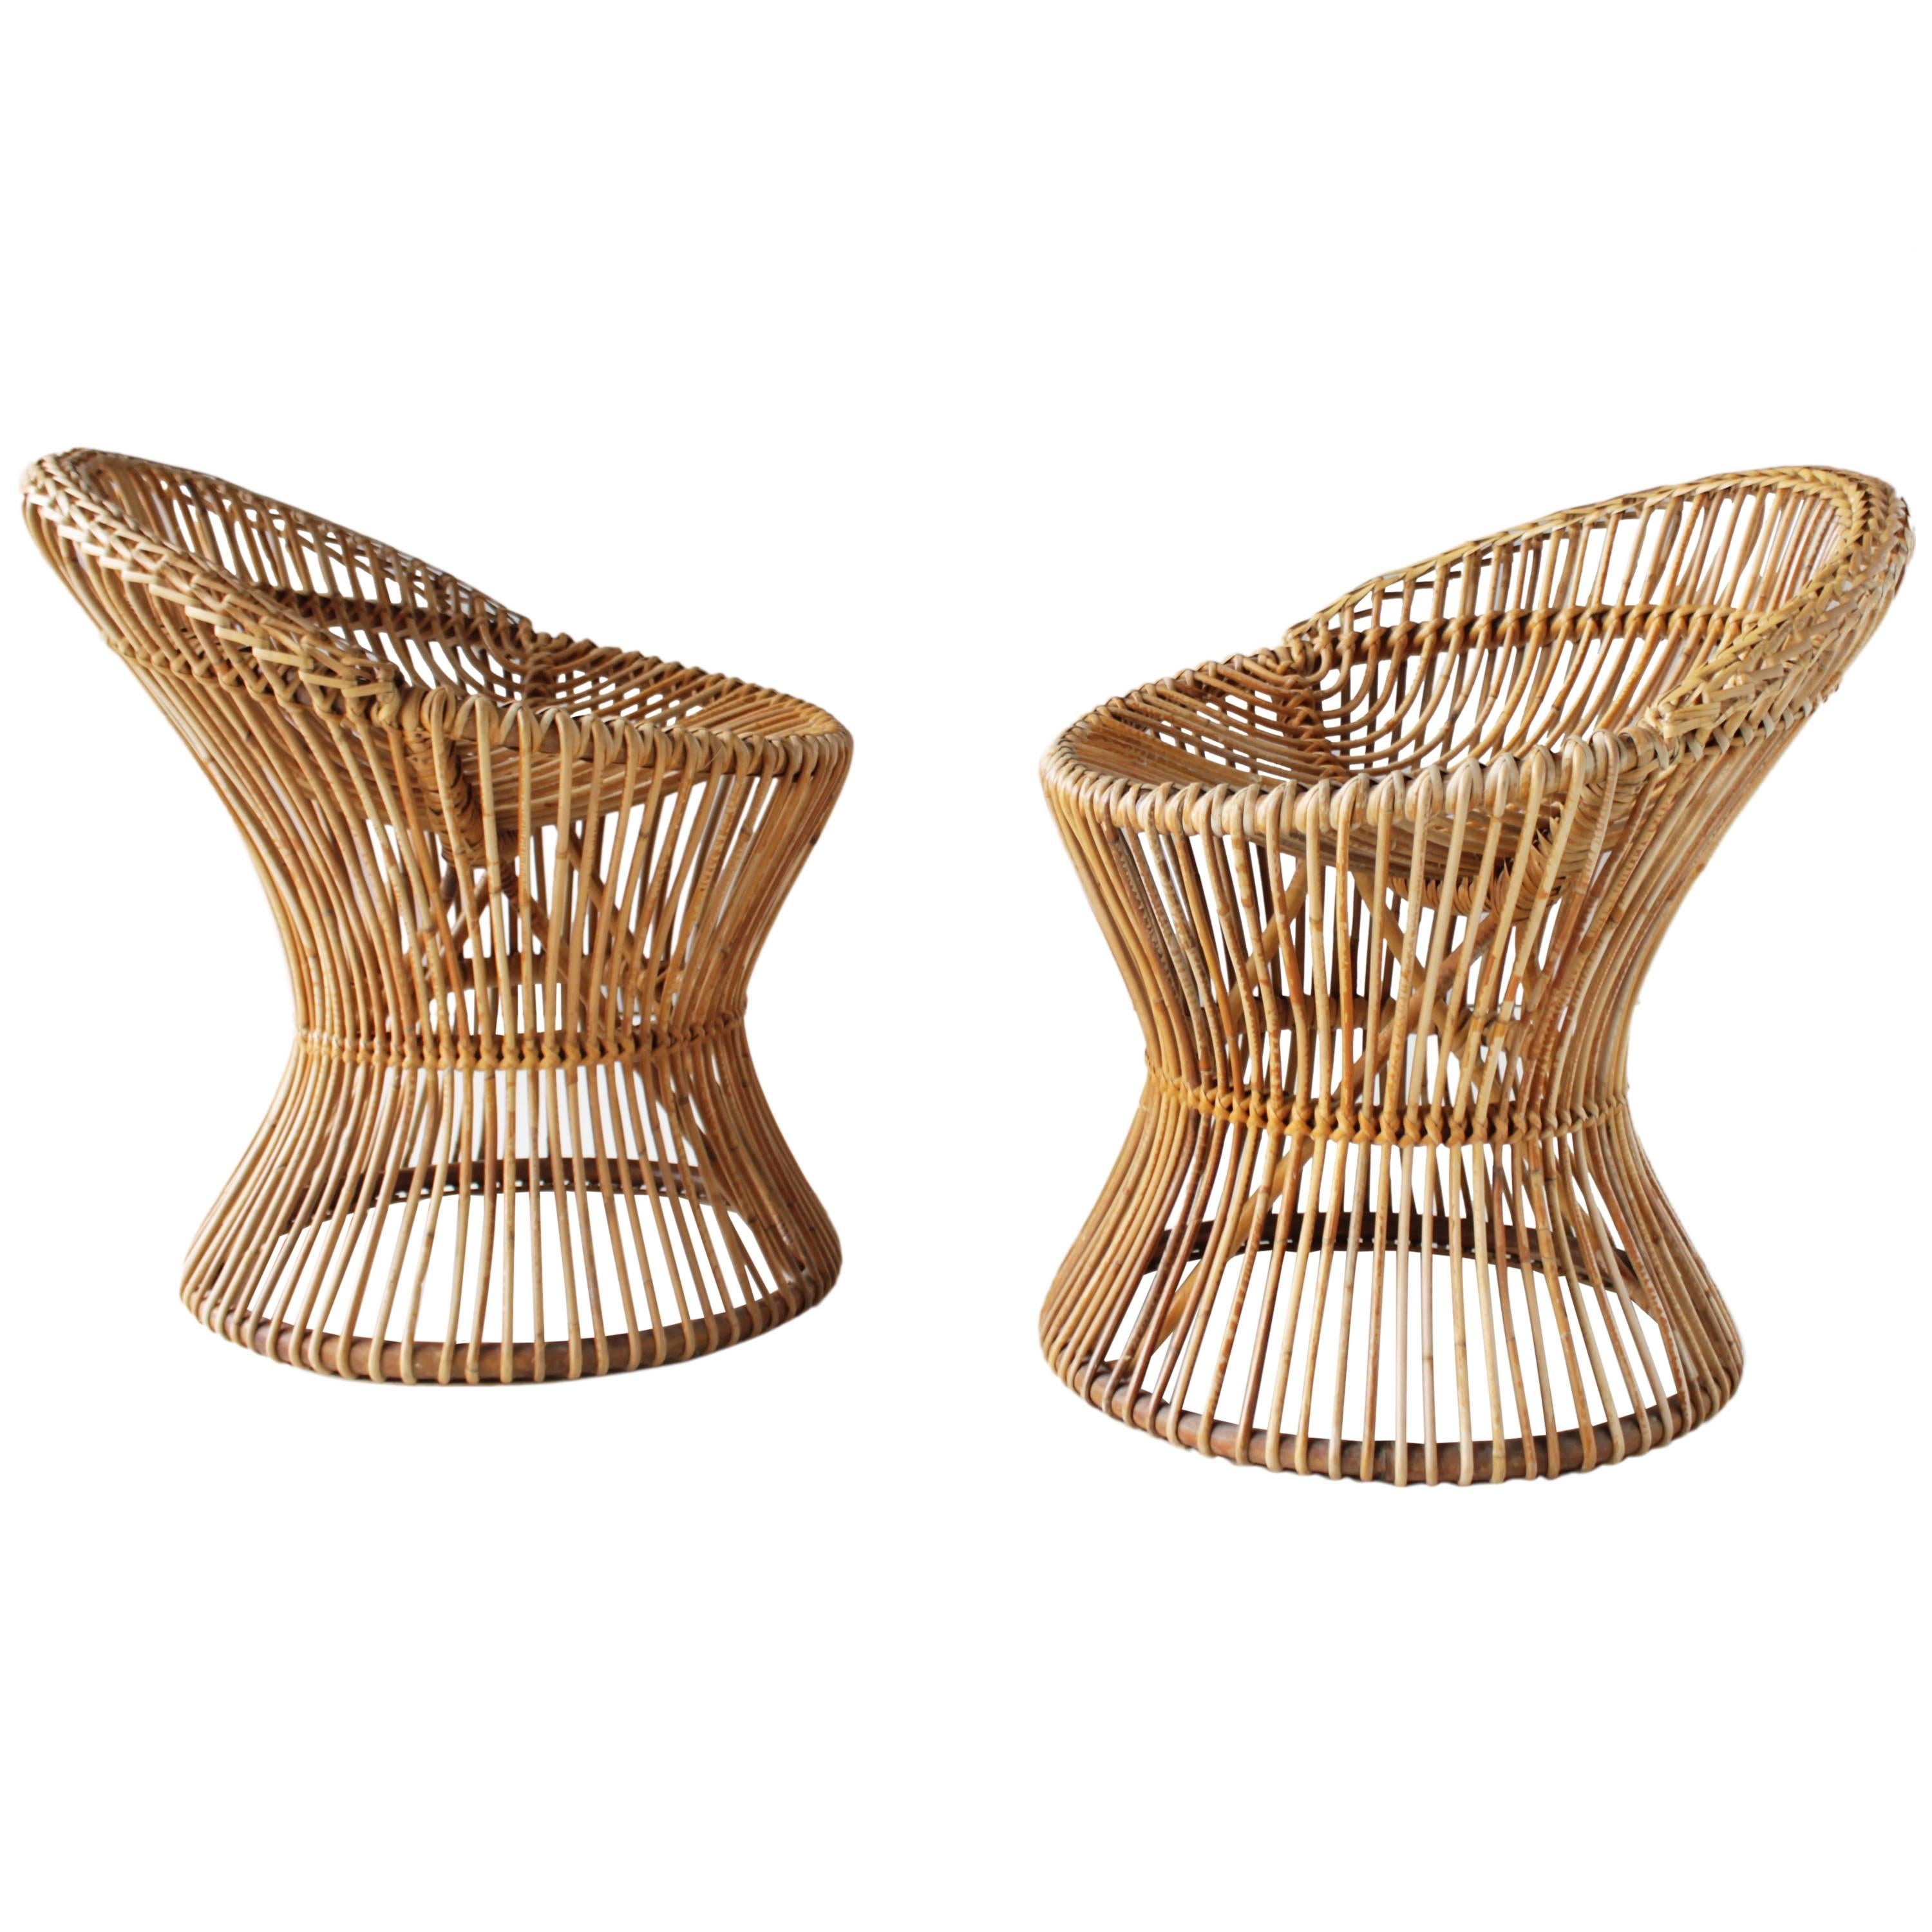 Pair of Rattan Italian Chairs Attributed to Franco Albini